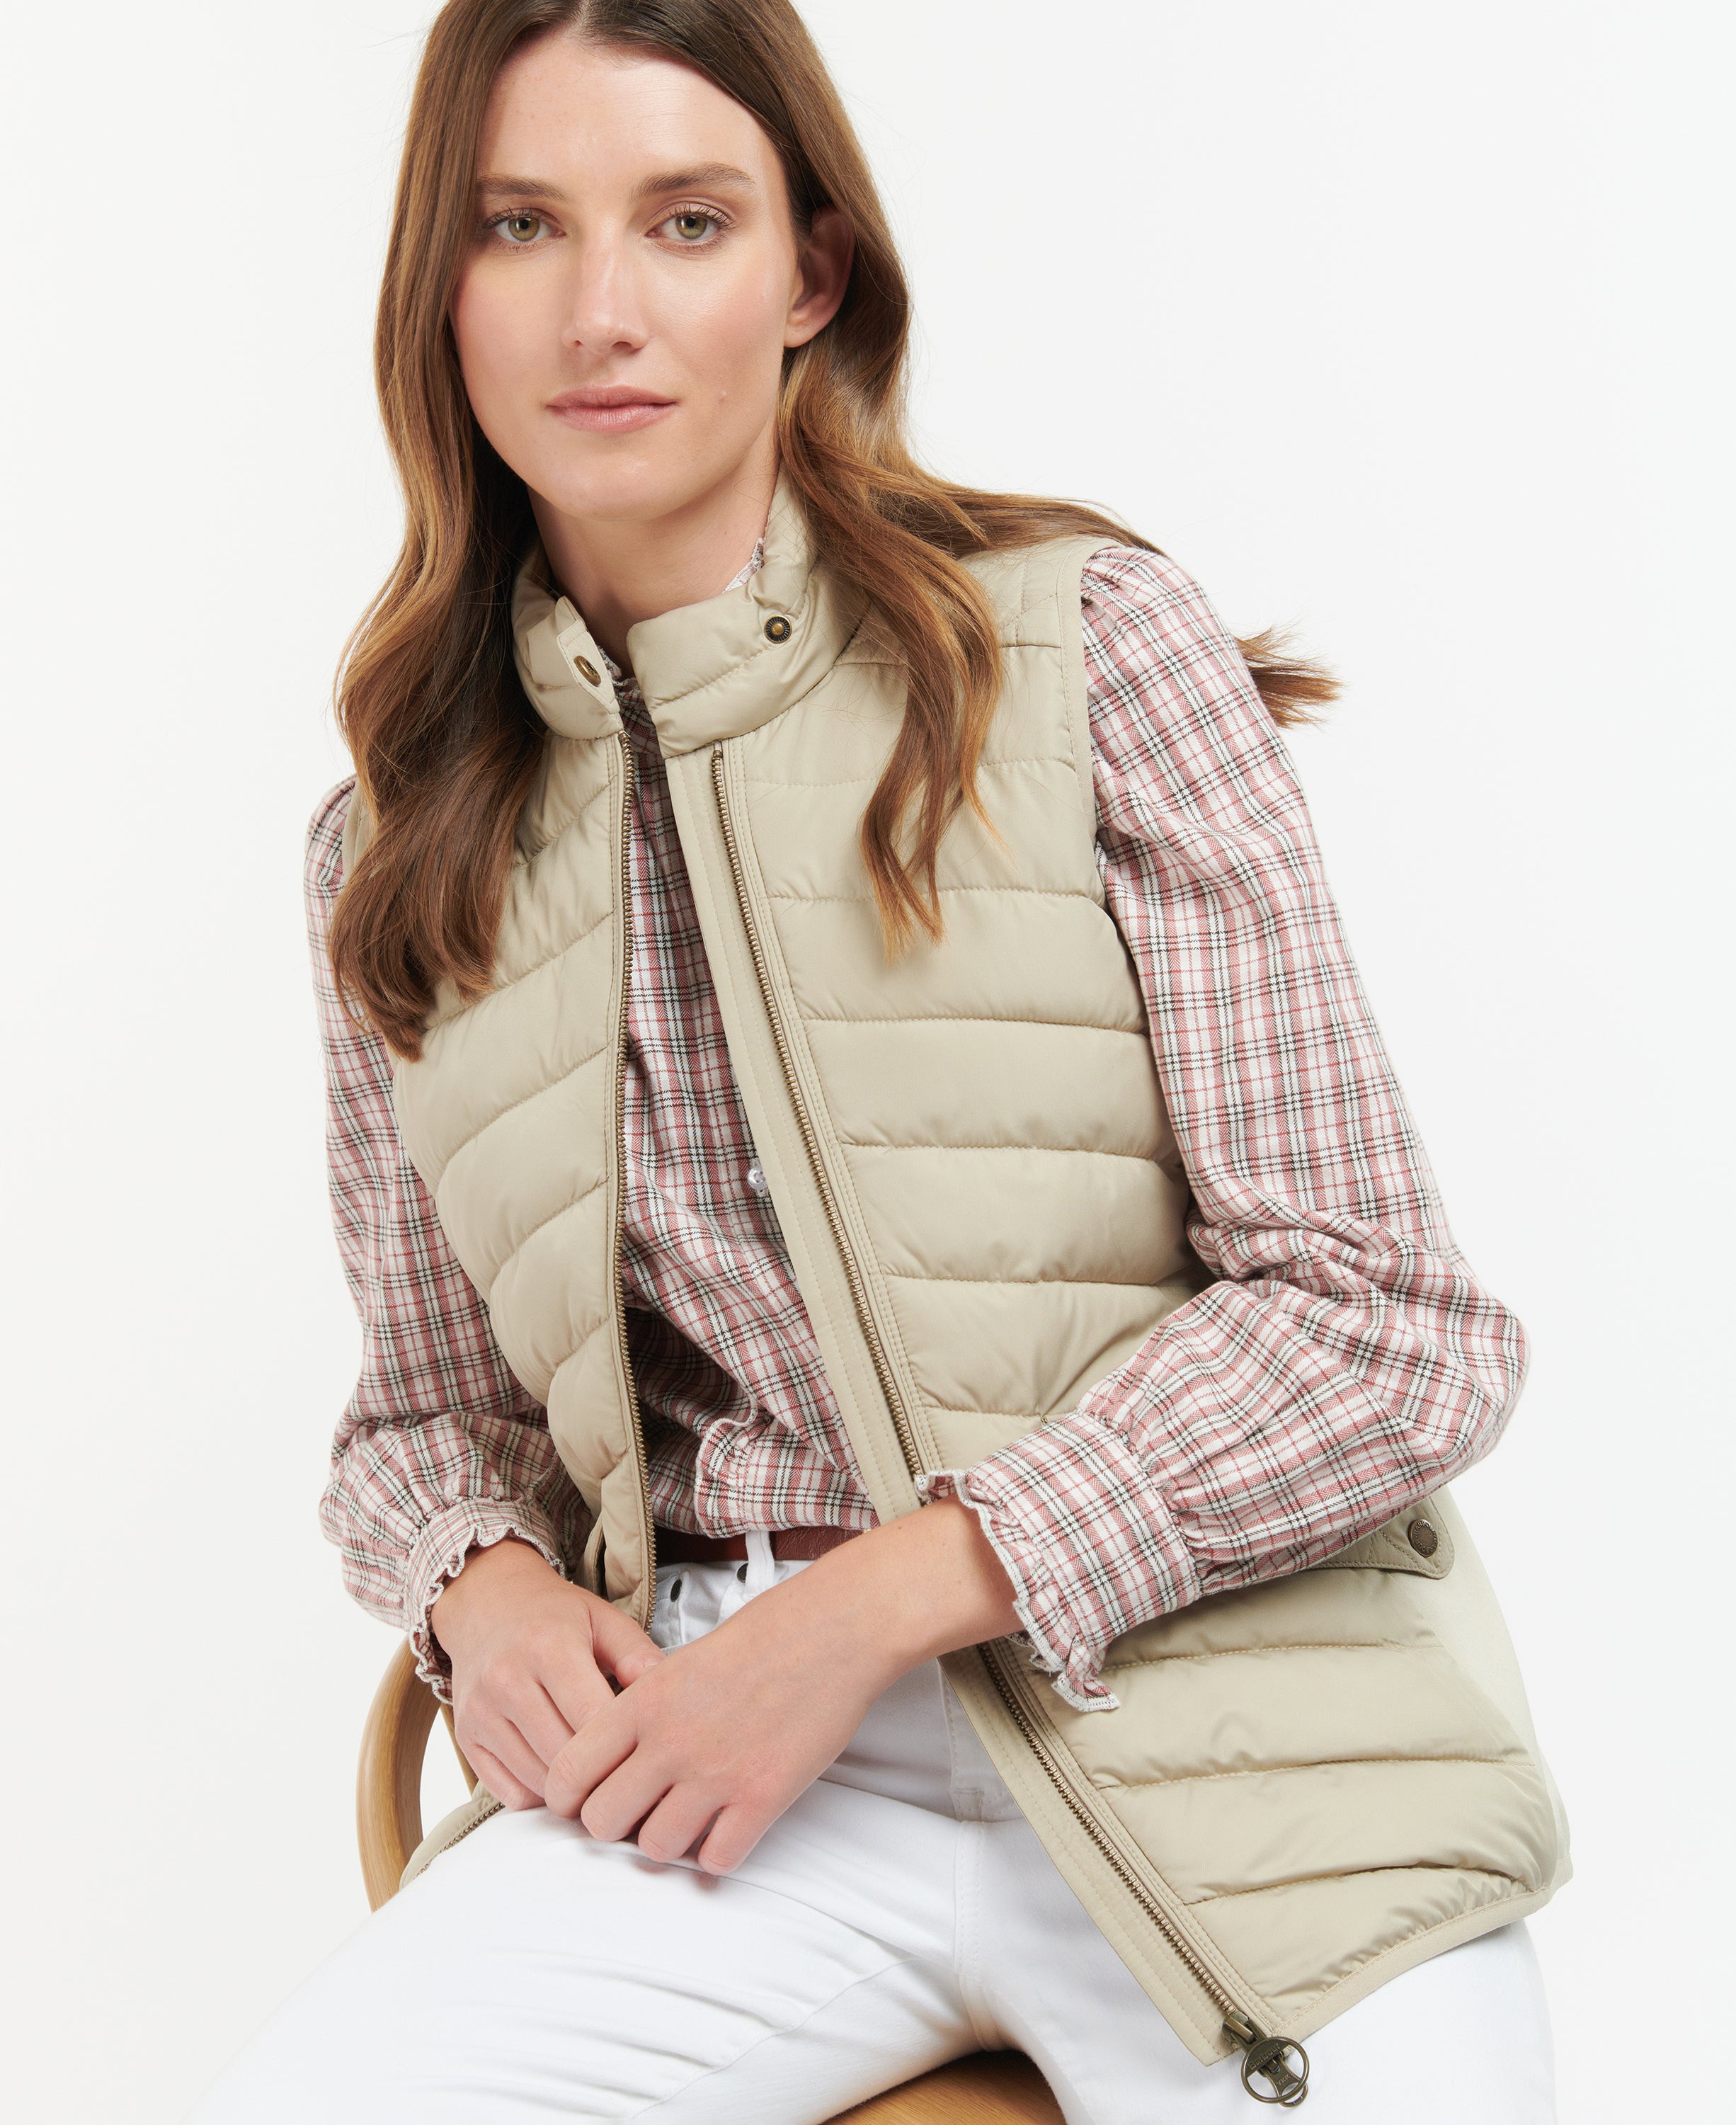 Barbour Ladies Stretch Cavalry Gilet in Sand